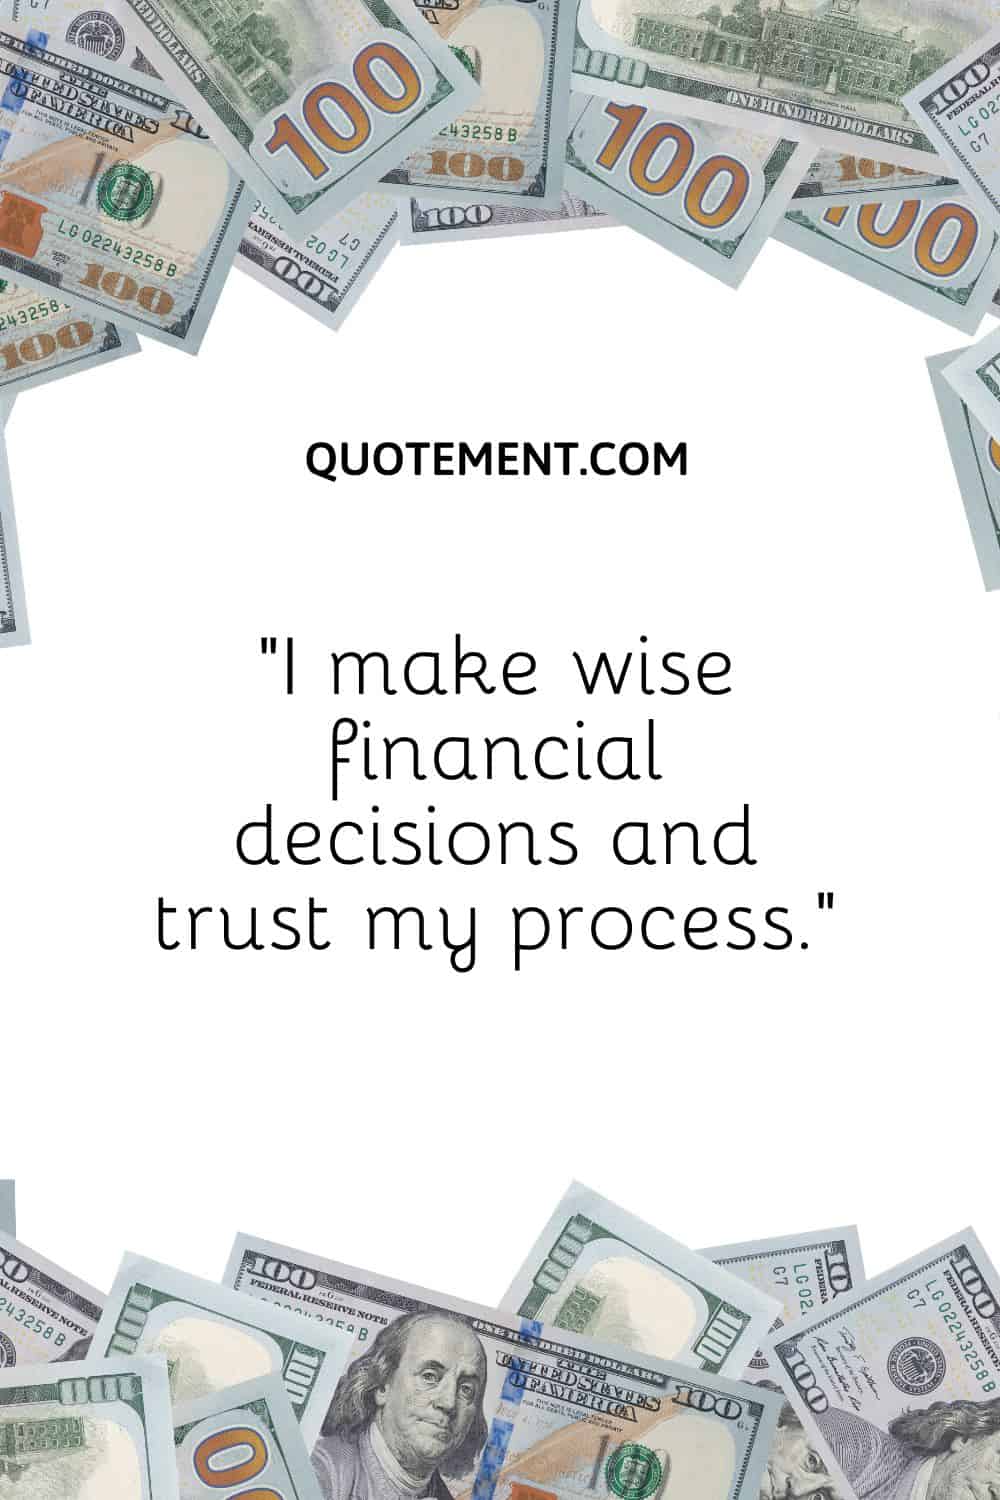 “I make wise financial decisions and trust my process.”